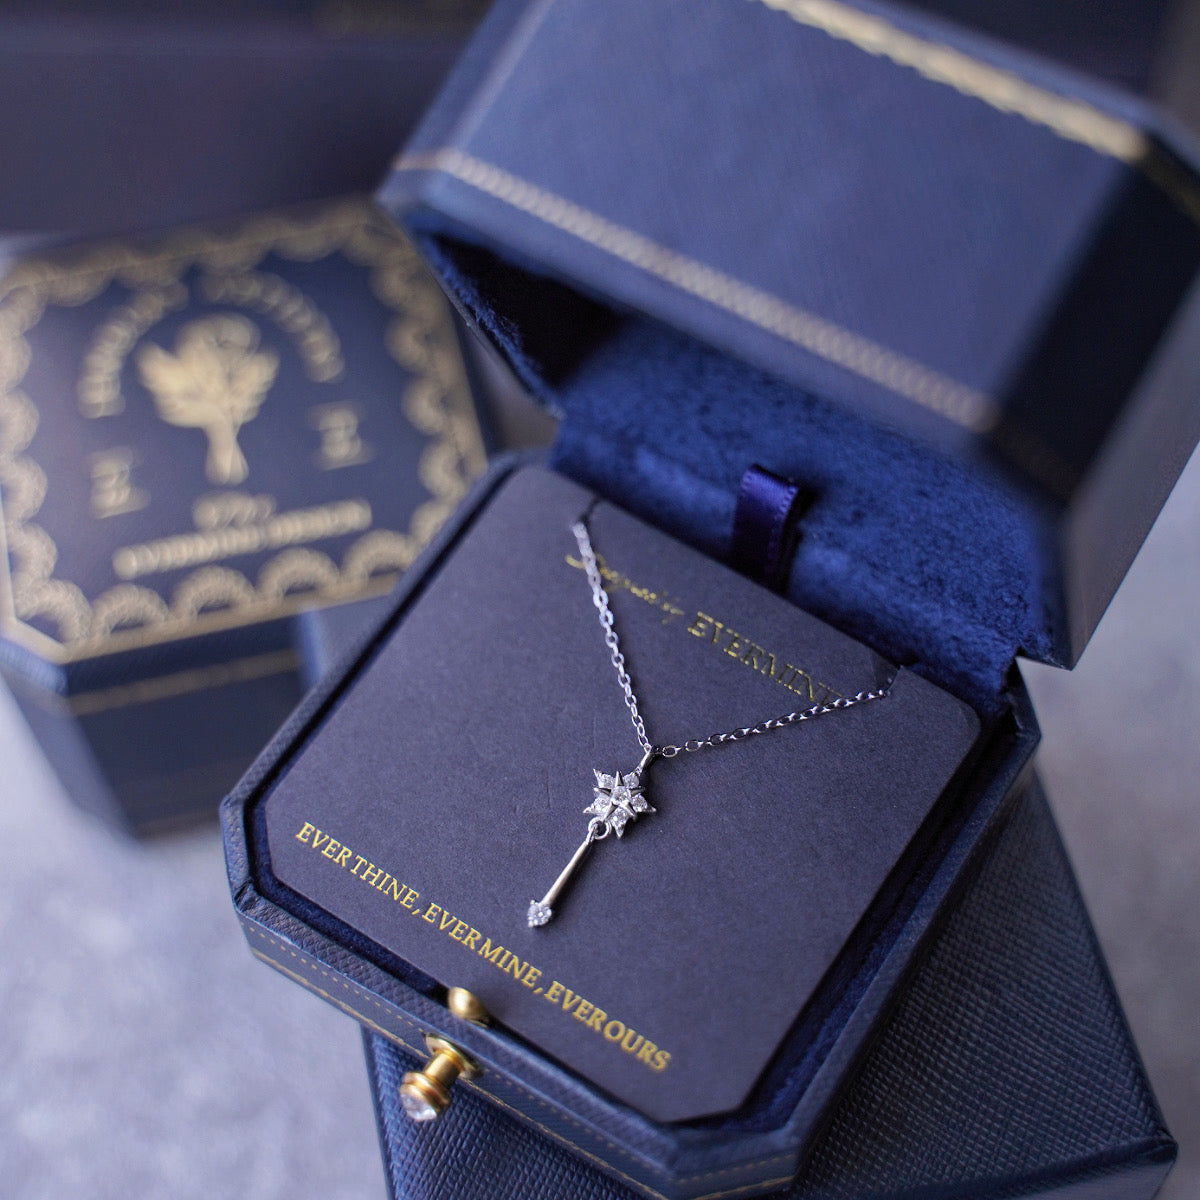 925 Silver Star Wand Necklace with Zirconia - Anime-Inspired Sparkling Design.